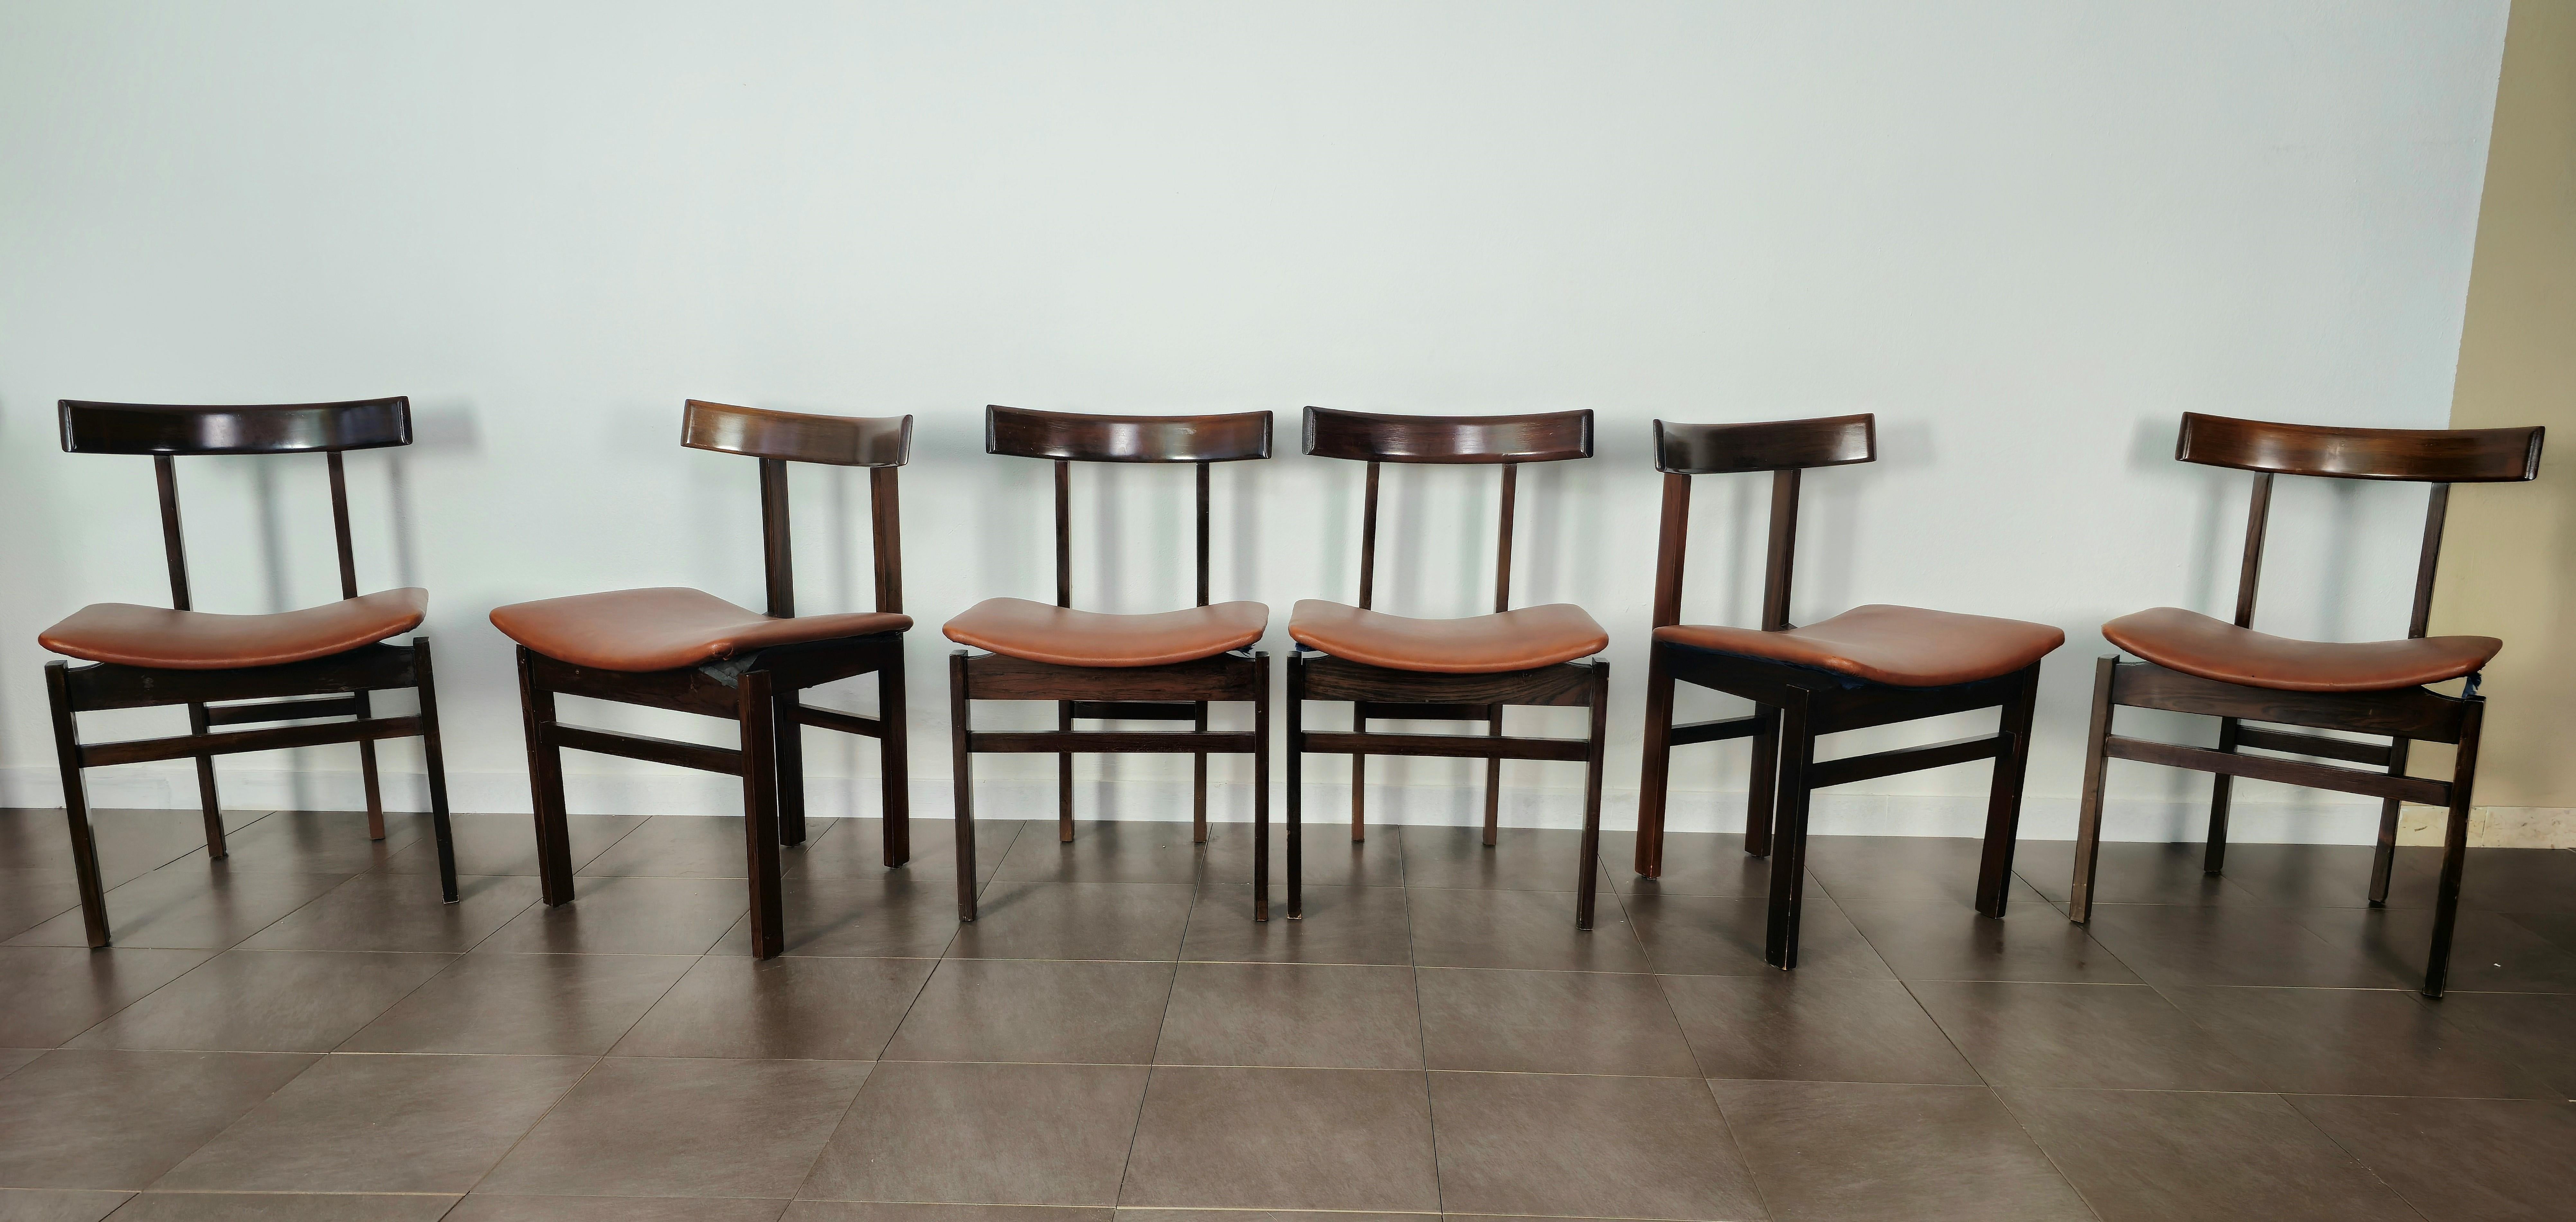 Set of 6 Danish-made dining chairs. Designed by designer Inger Klingenberg and produced in the 60s by France & Son.
Every single chair was made of wood with a leather seat in shades of brown. the particularity of each chair is given by the back and